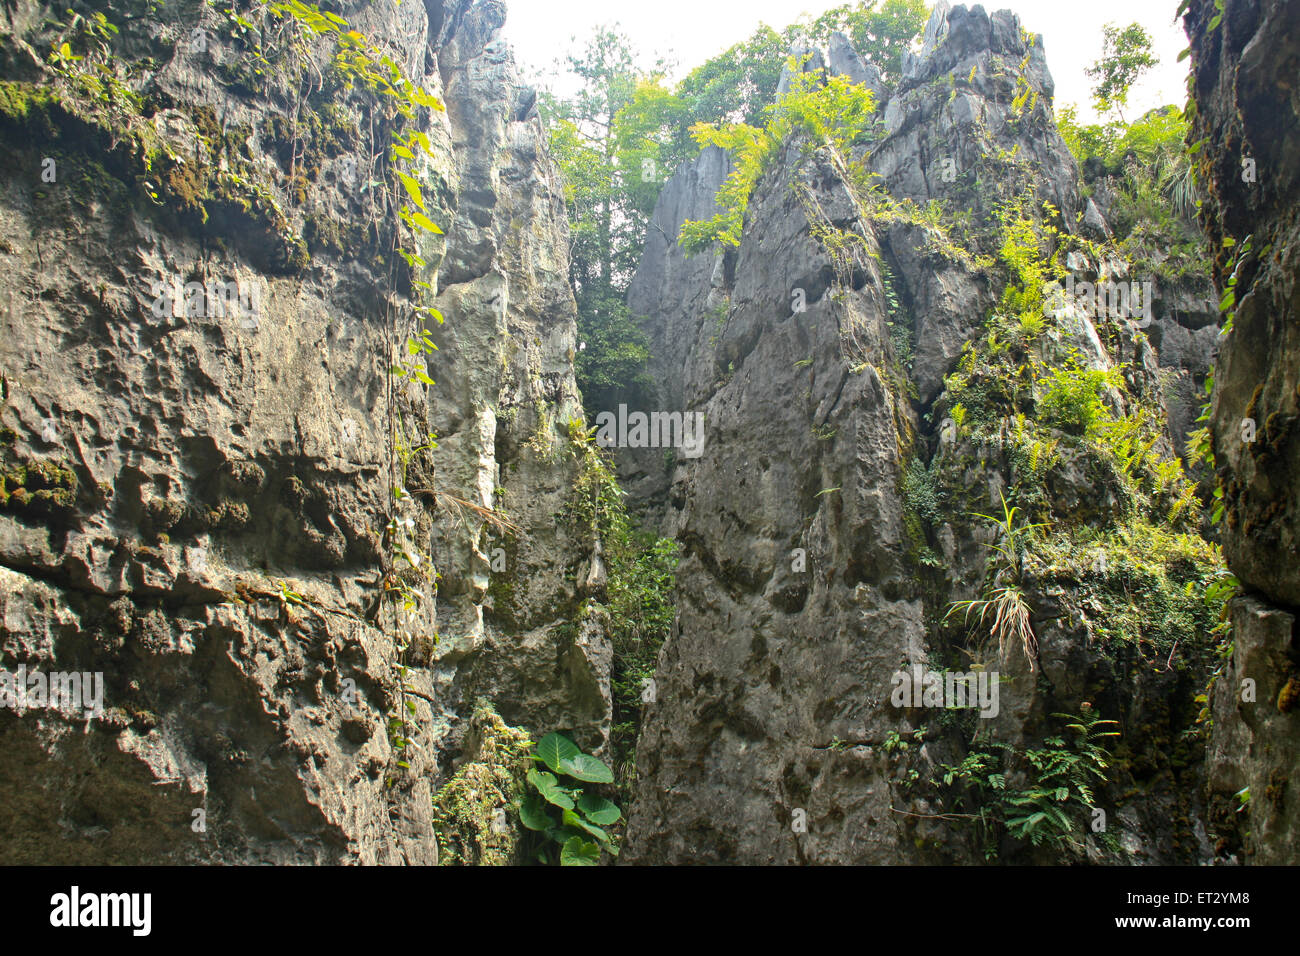 The sharp peaks of the mountains - the Stone Forest. Stock Photo